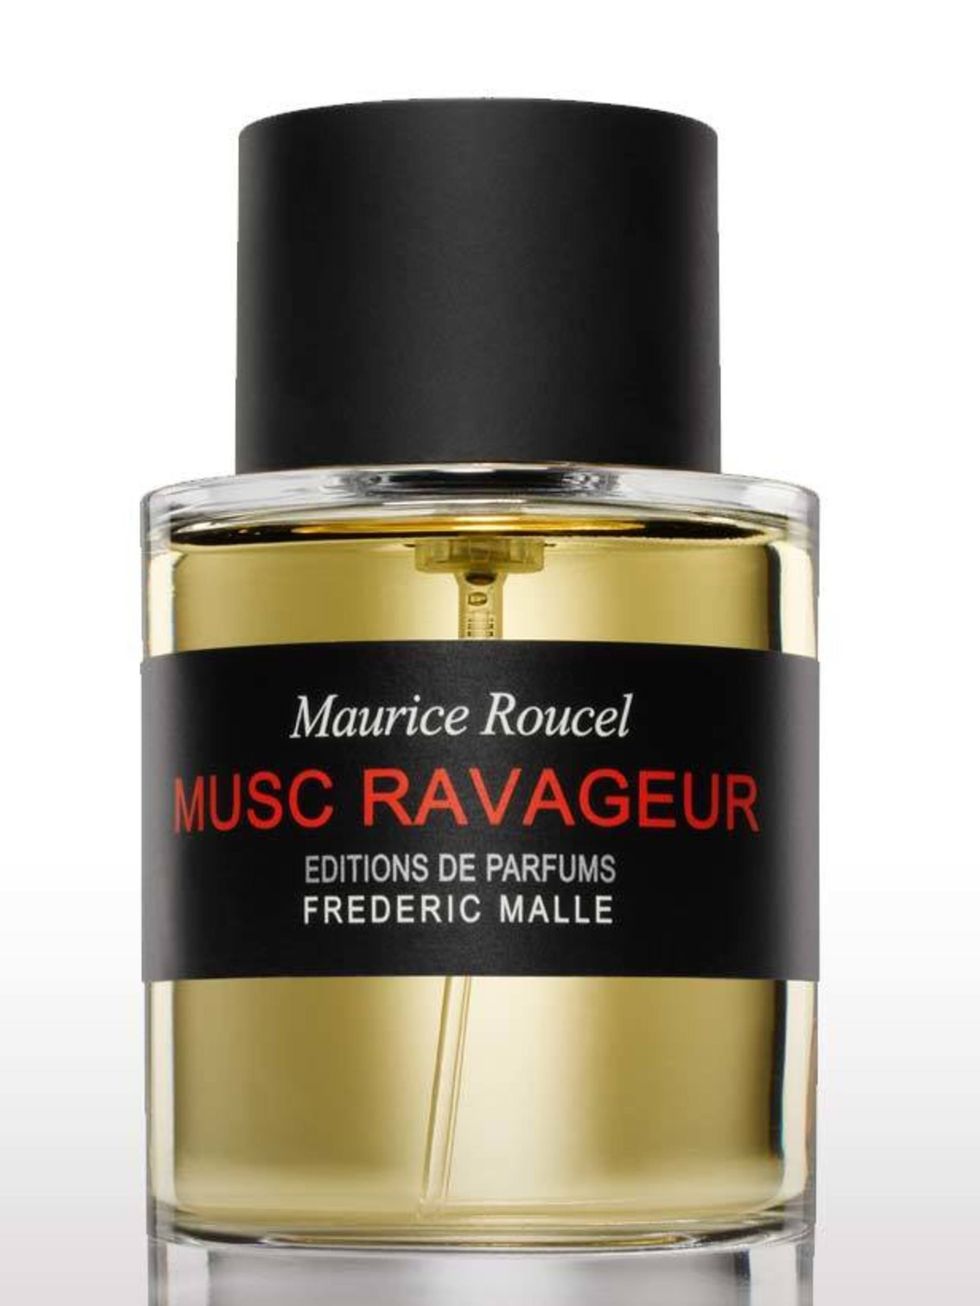 <p>Created by self-taught perfumer Maurice Roucel for Frederic Malle, this musk scent with hints of clove, cinnamon and vanilla is sweet and heady. It smells of leather, tobacco and is a warm, rich scent. Definitely not one for shrinking violets. </p><p>M